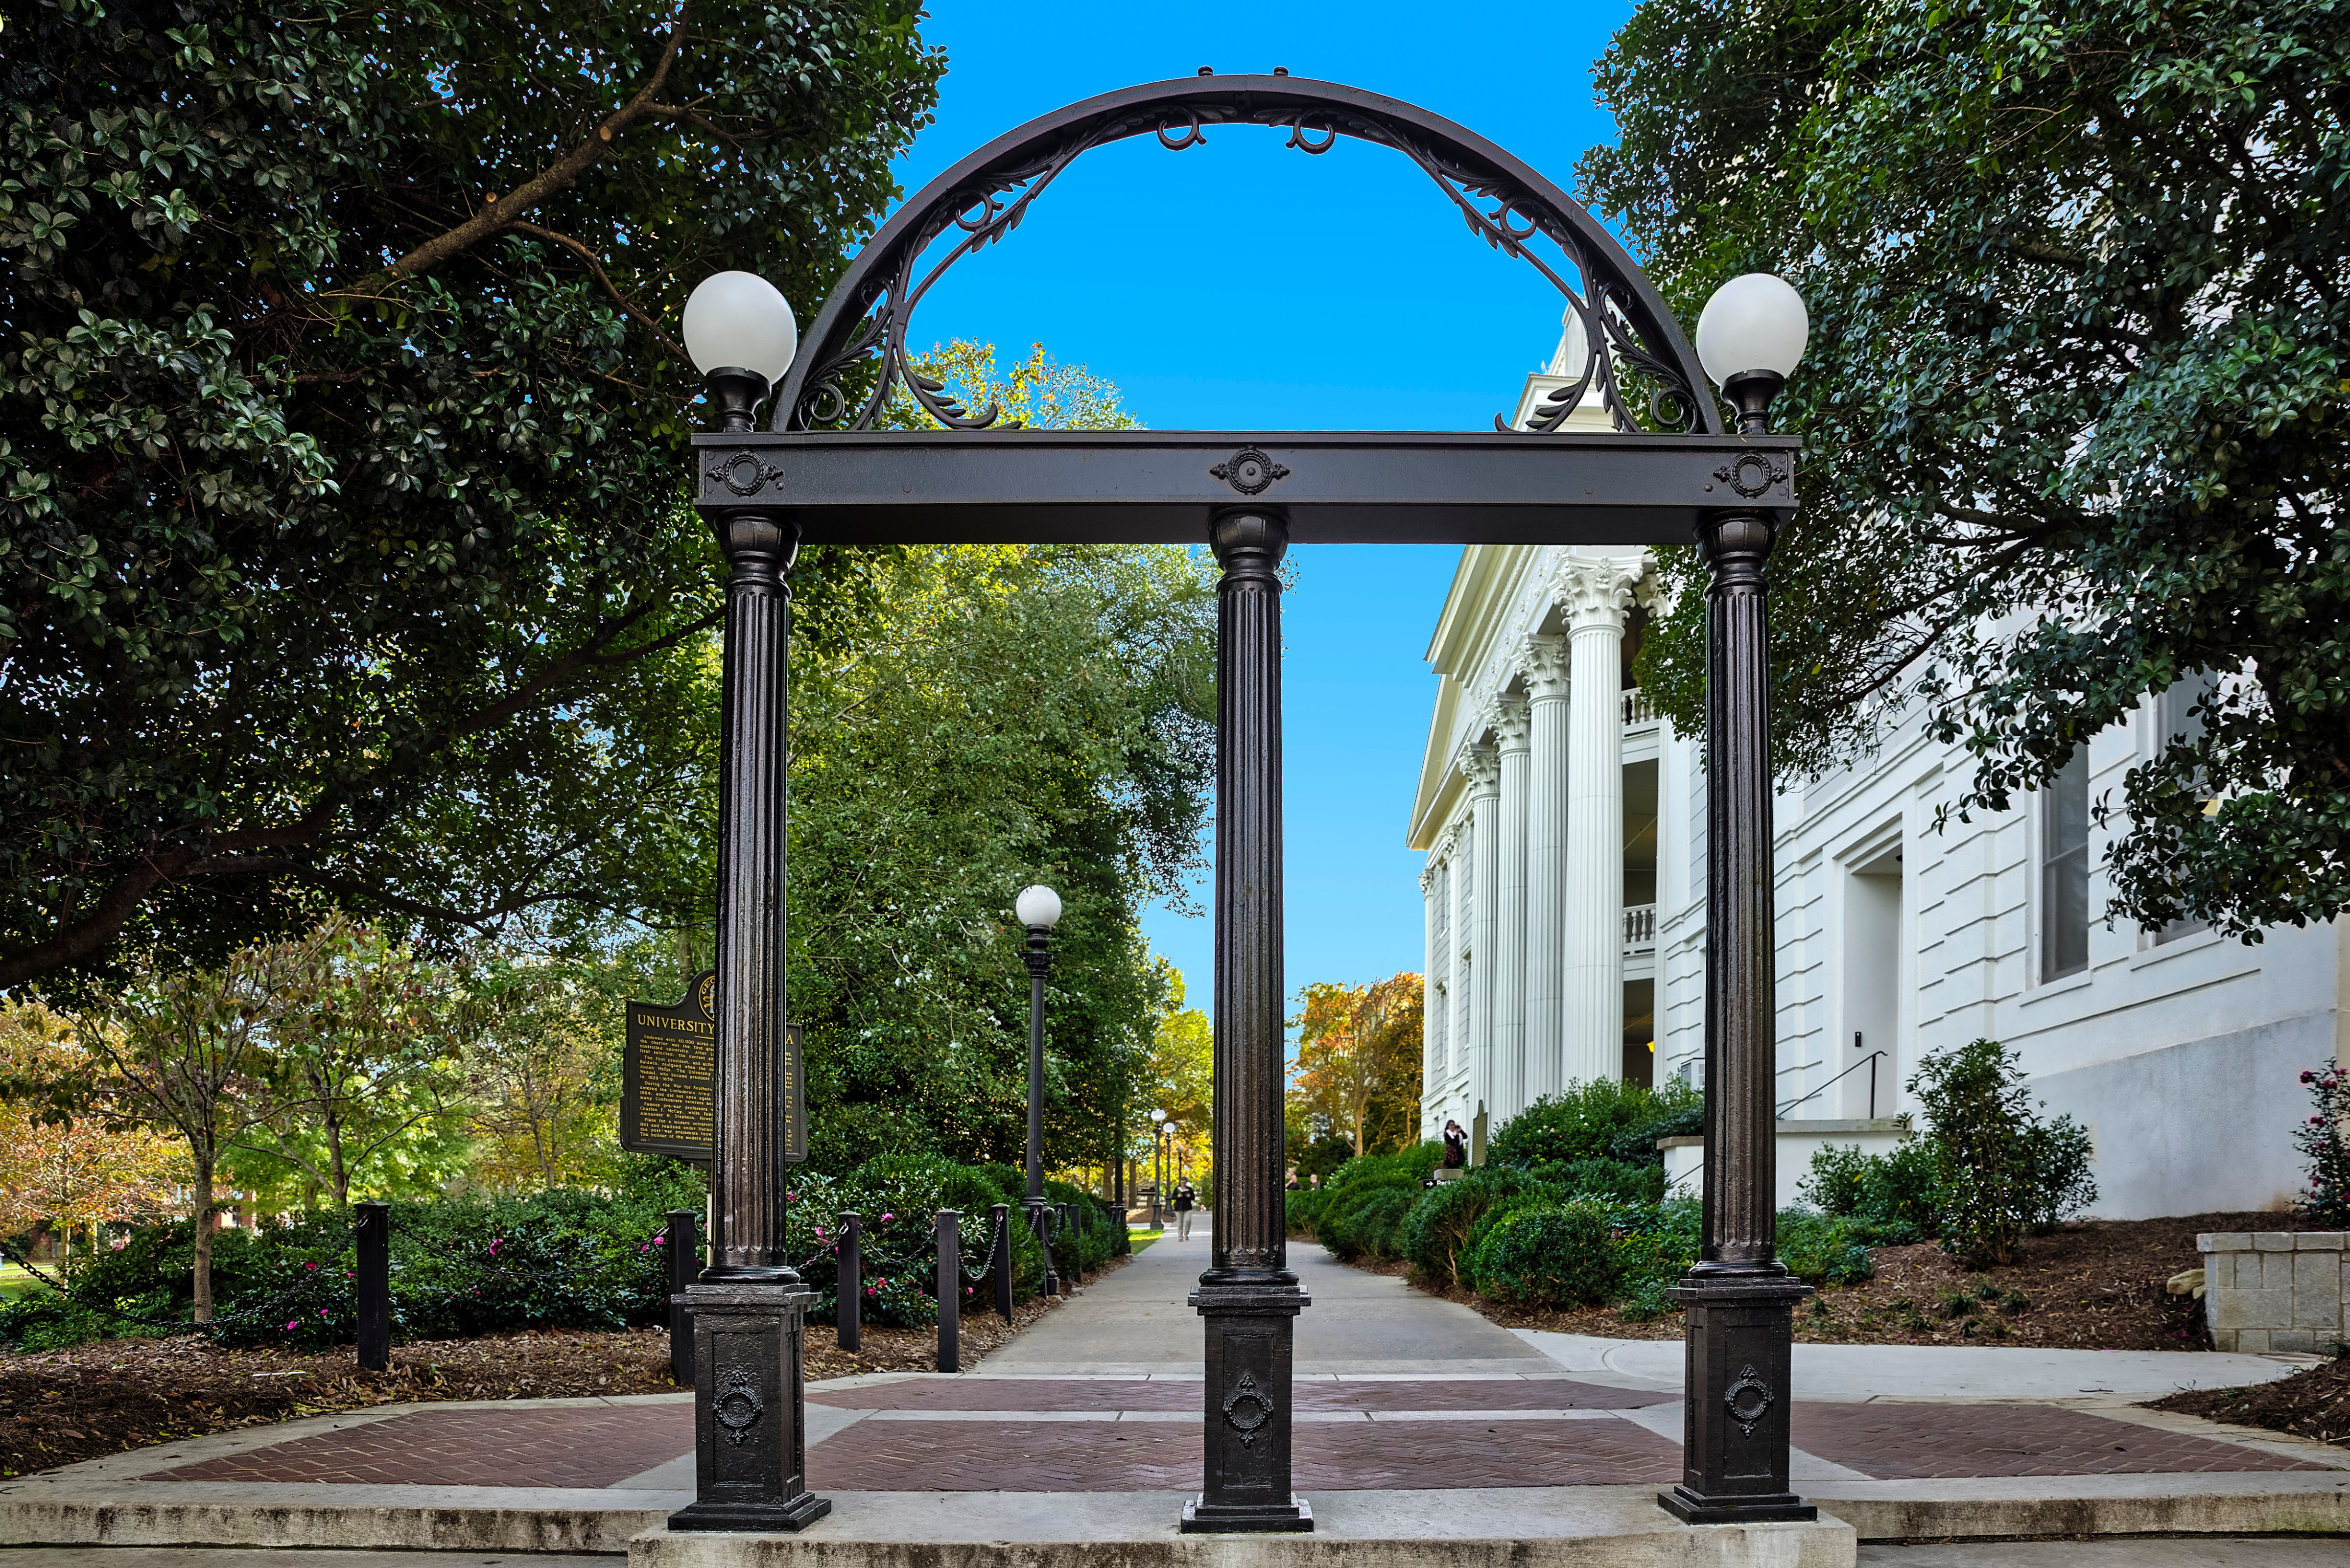 The Georgia Arch at the University of Georgia in Athens. (John Greim—LightRocket/Getty Images)